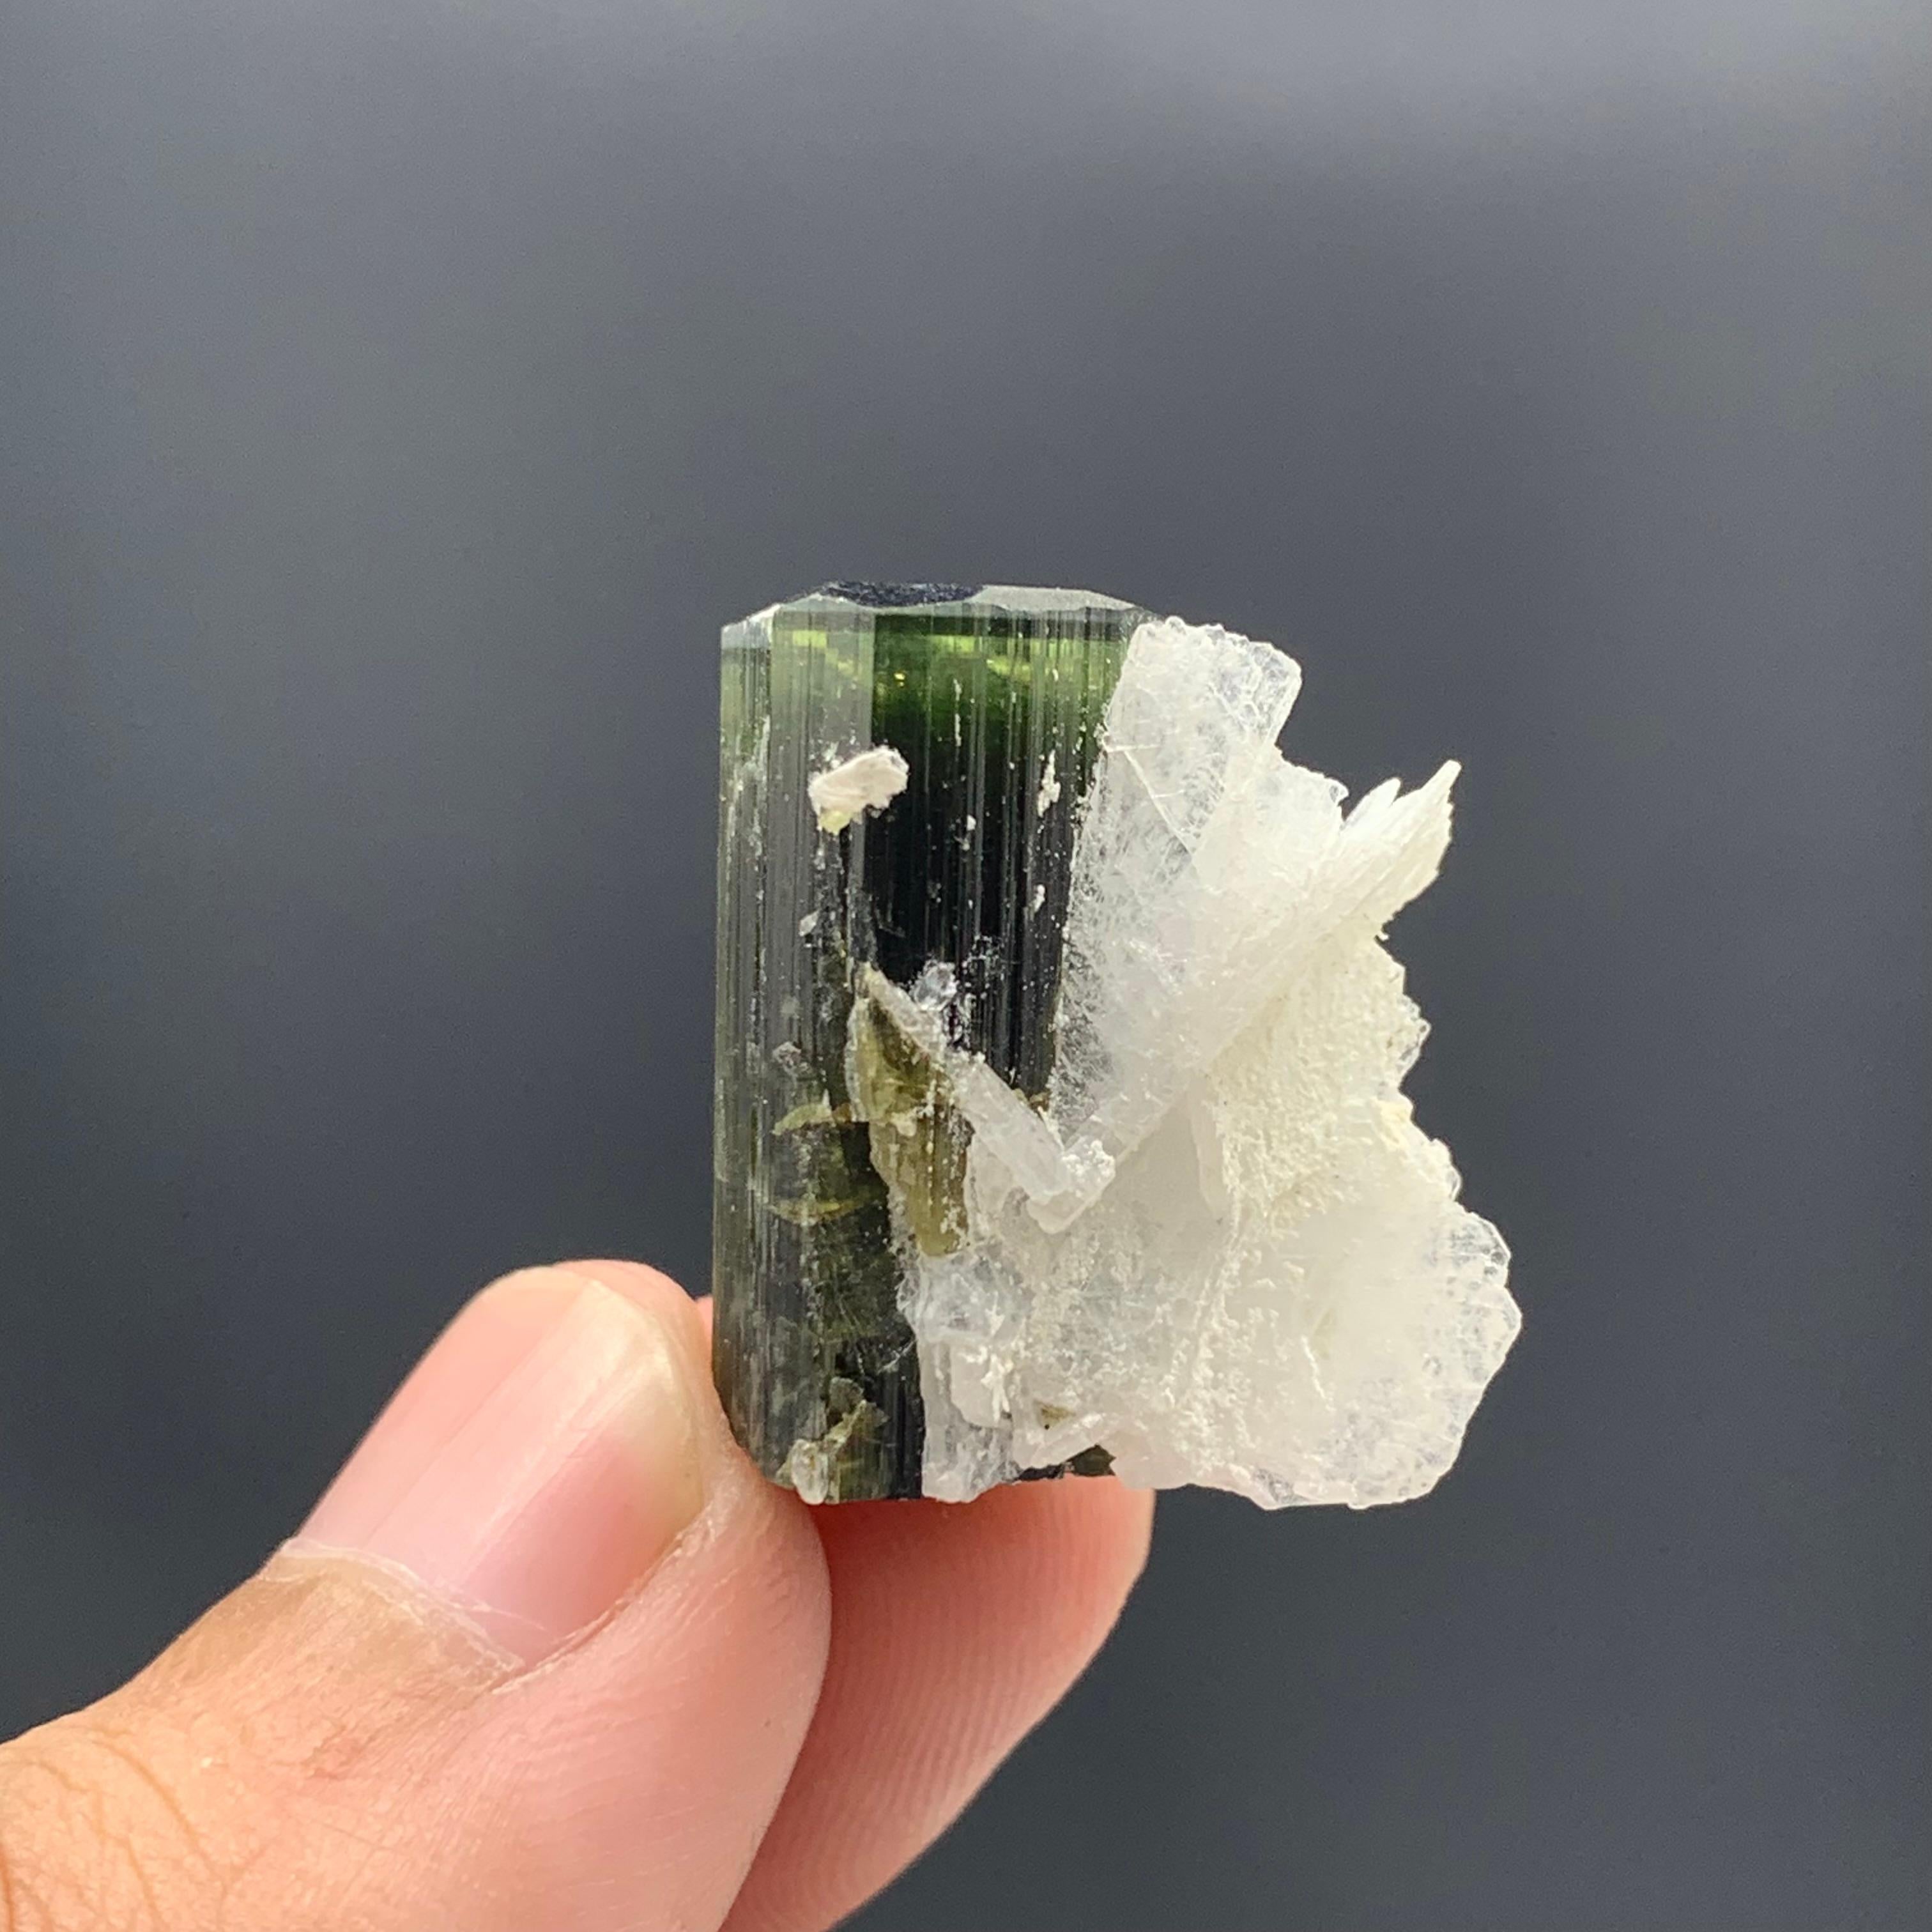 Rock Crystal 46.95 Cts Lovely Tourmaline With Albite Specimen From Stak Nala Valley, Pakistan For Sale